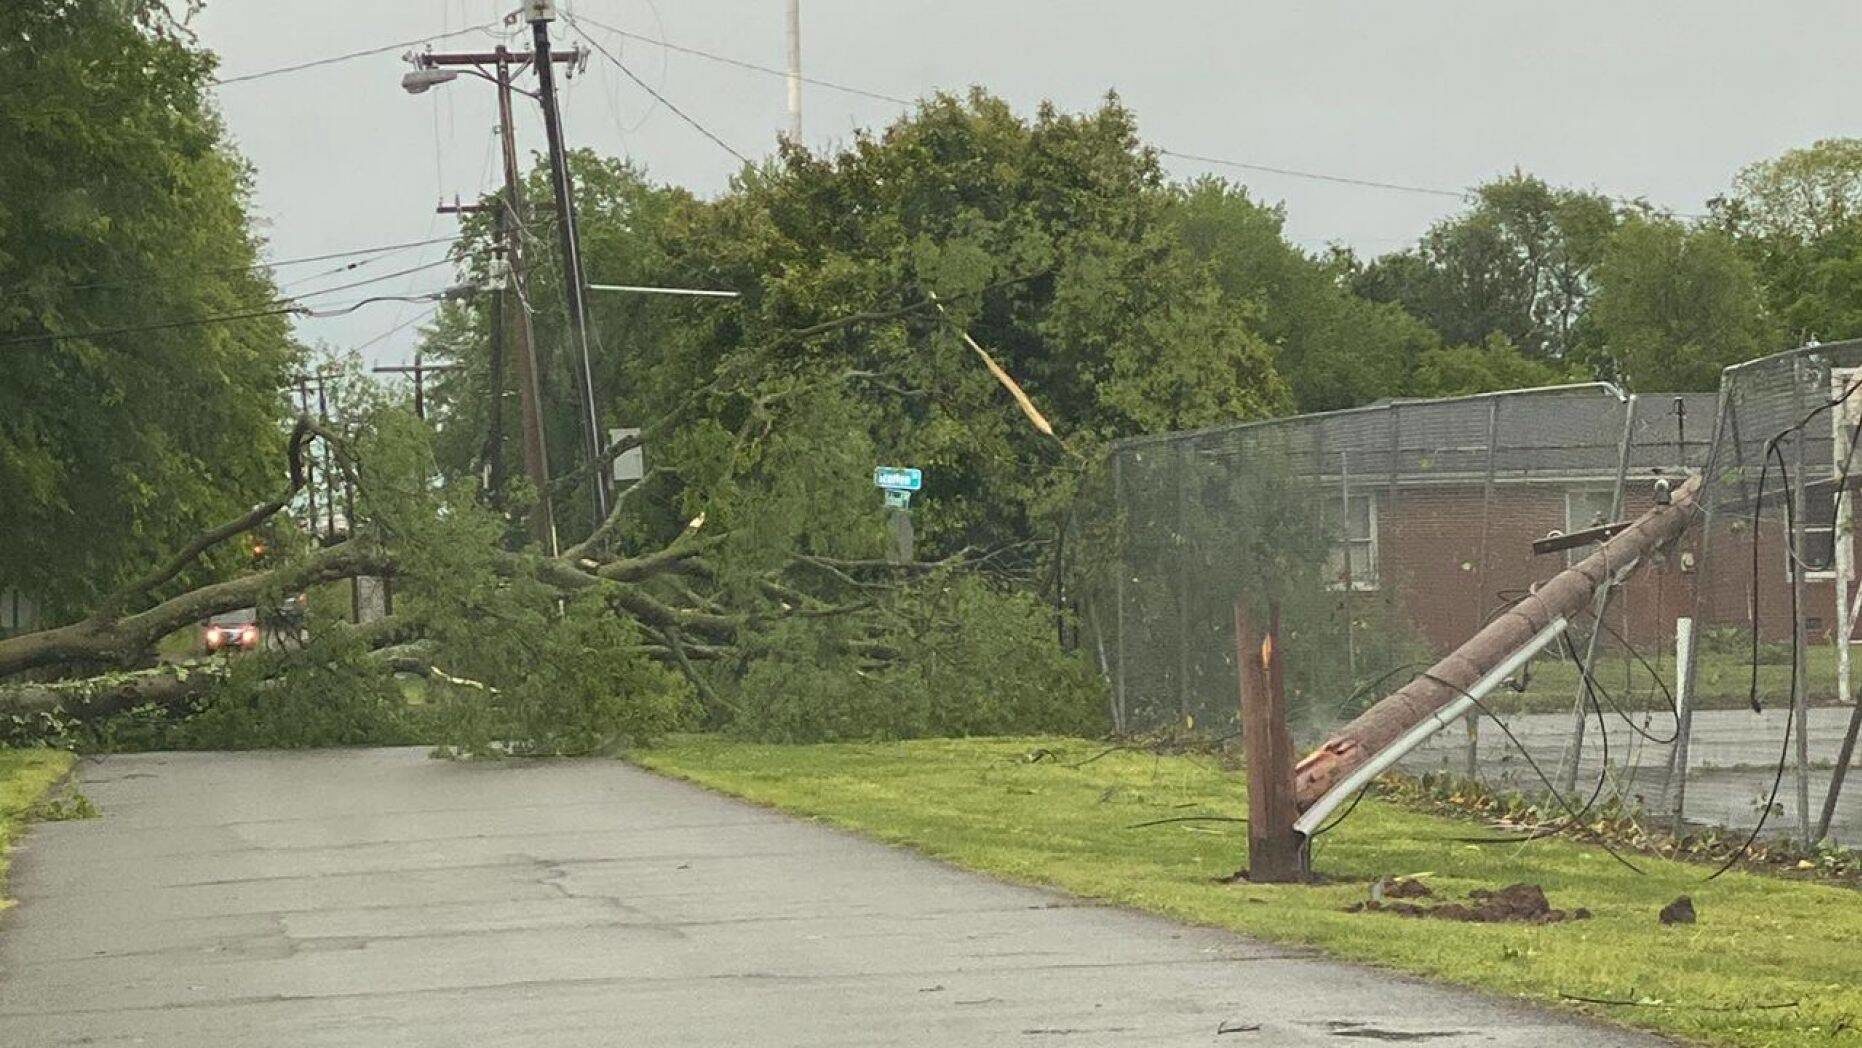 A powerful line of thunderstorms snapped trees and brought down power lines across Middle Tennessee